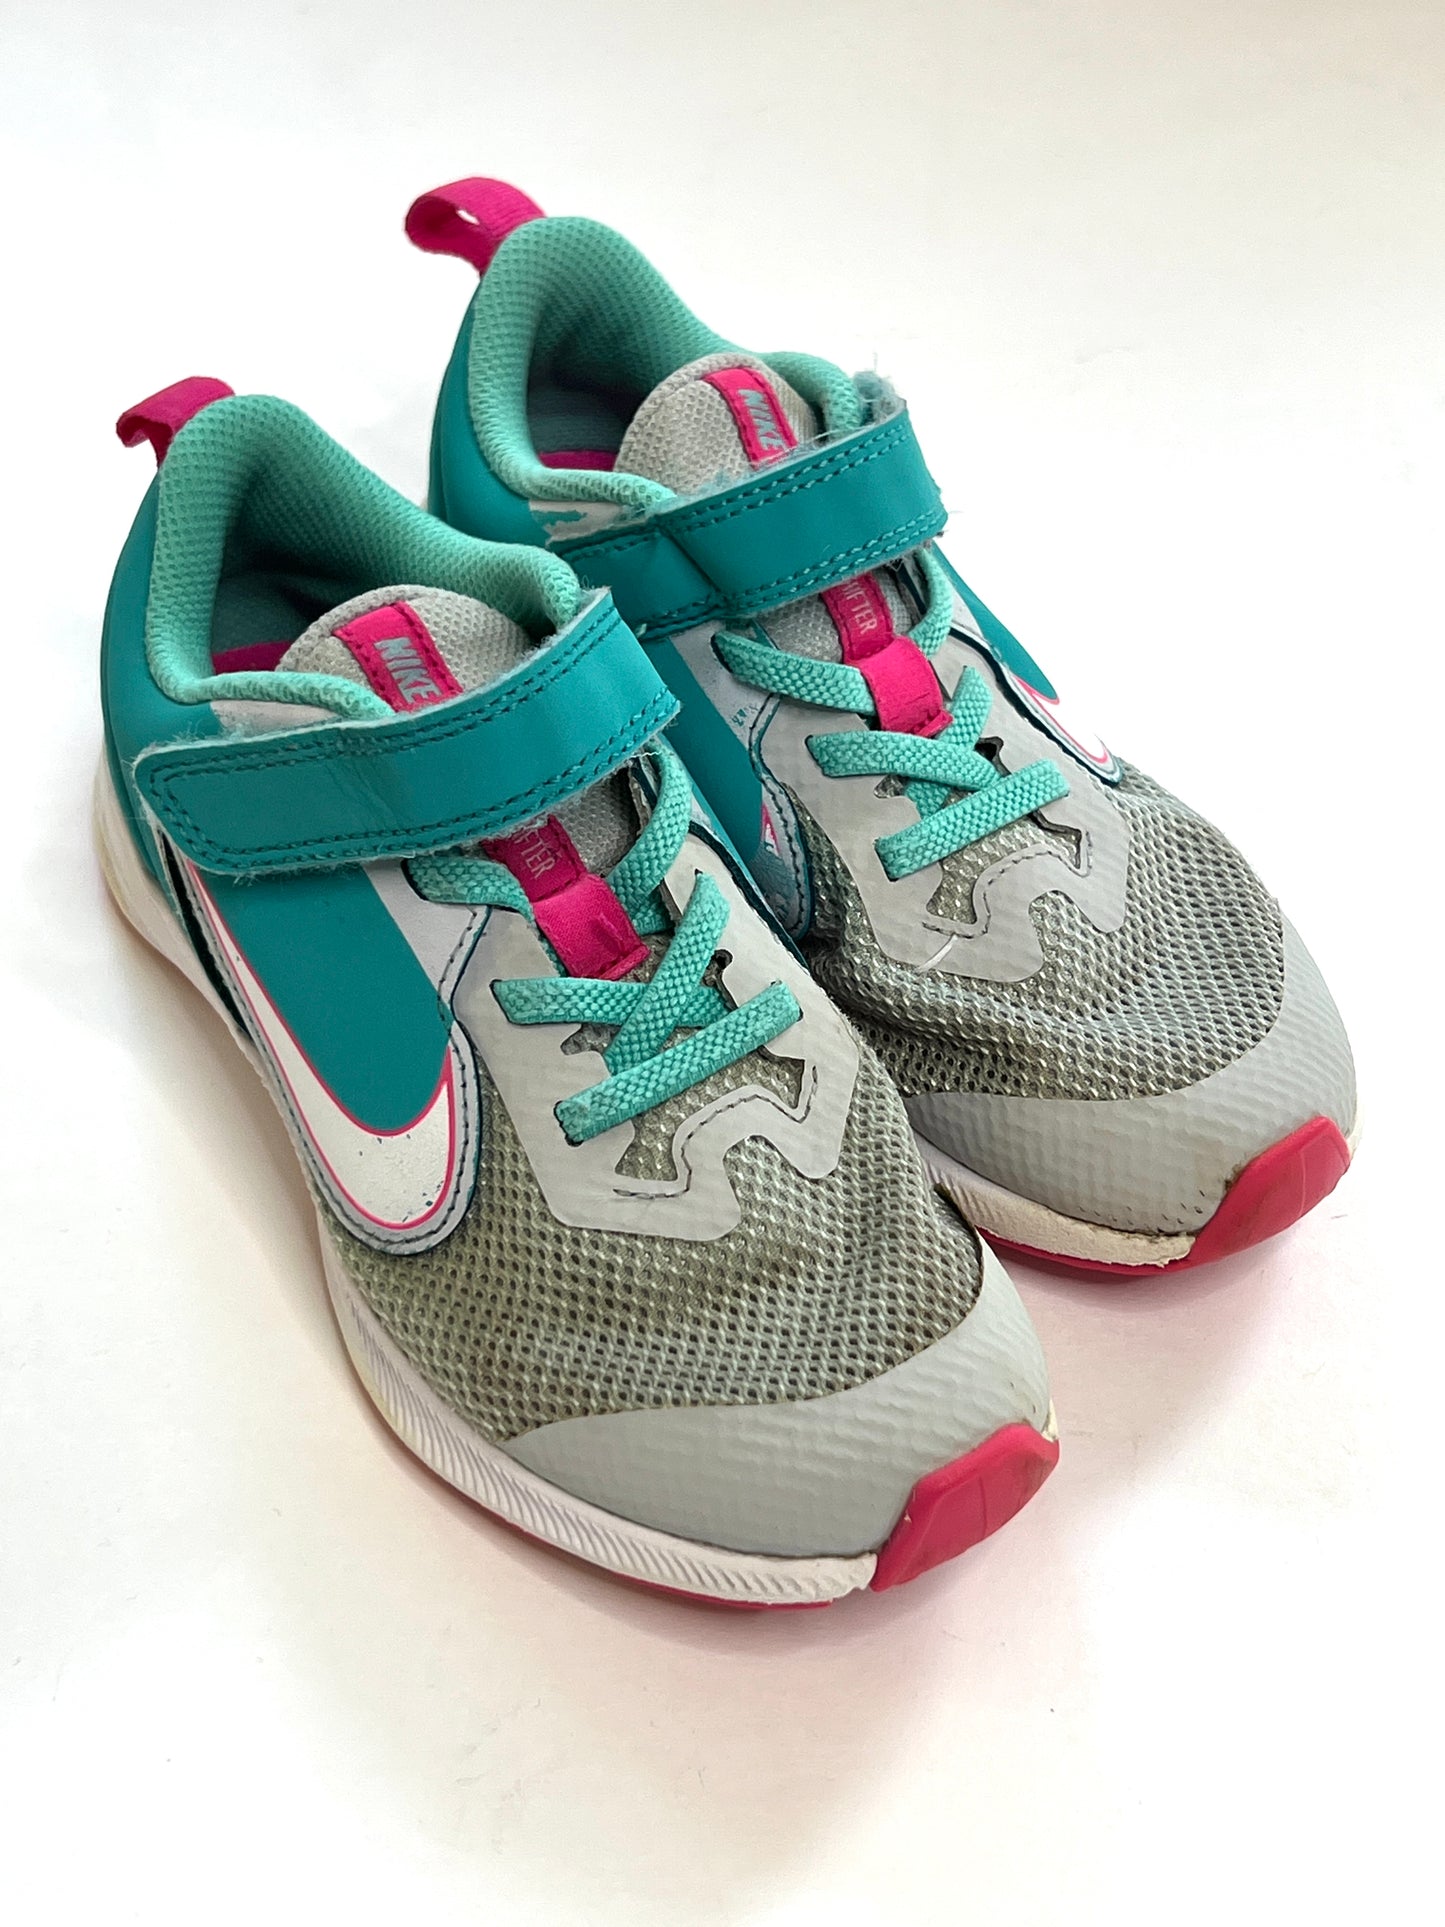 Girls Size 12 Nike Teal, Pink and Grey GUC (one Swoosh has some peeling, see pic)